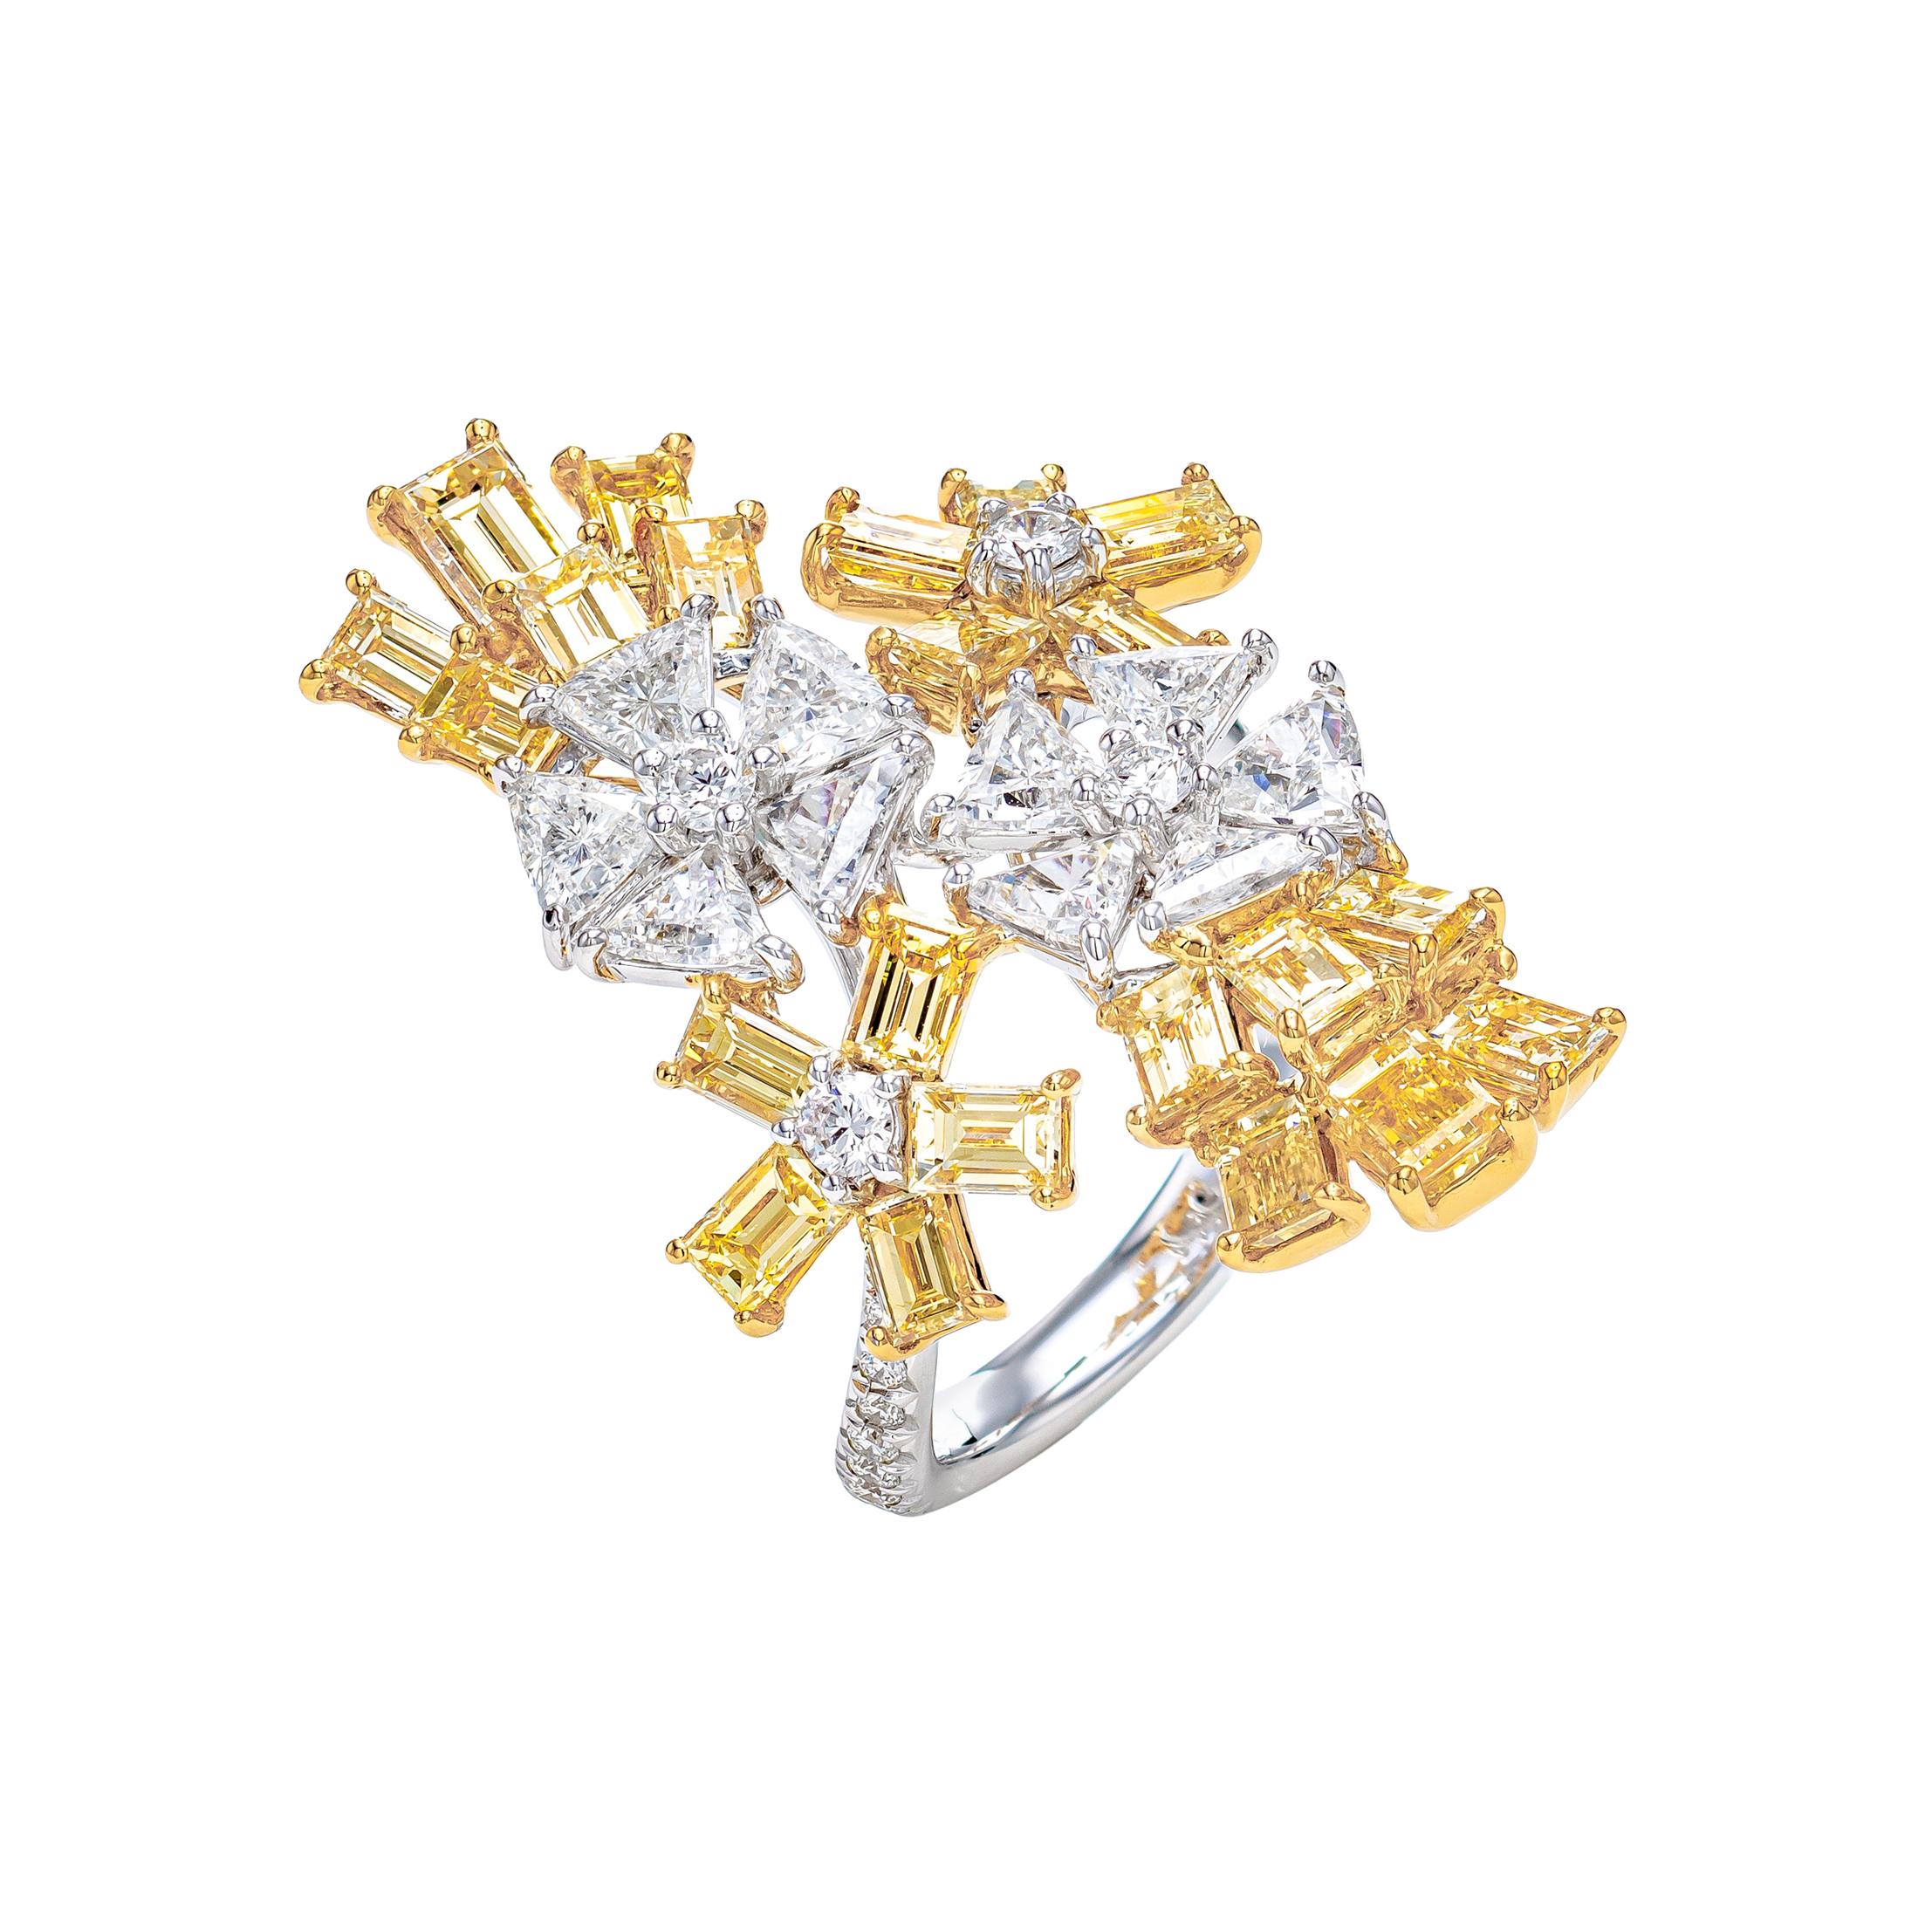 5.39 Carat Floral Wrap Fancy Yellow and White Diamond Ring in 18K Gold